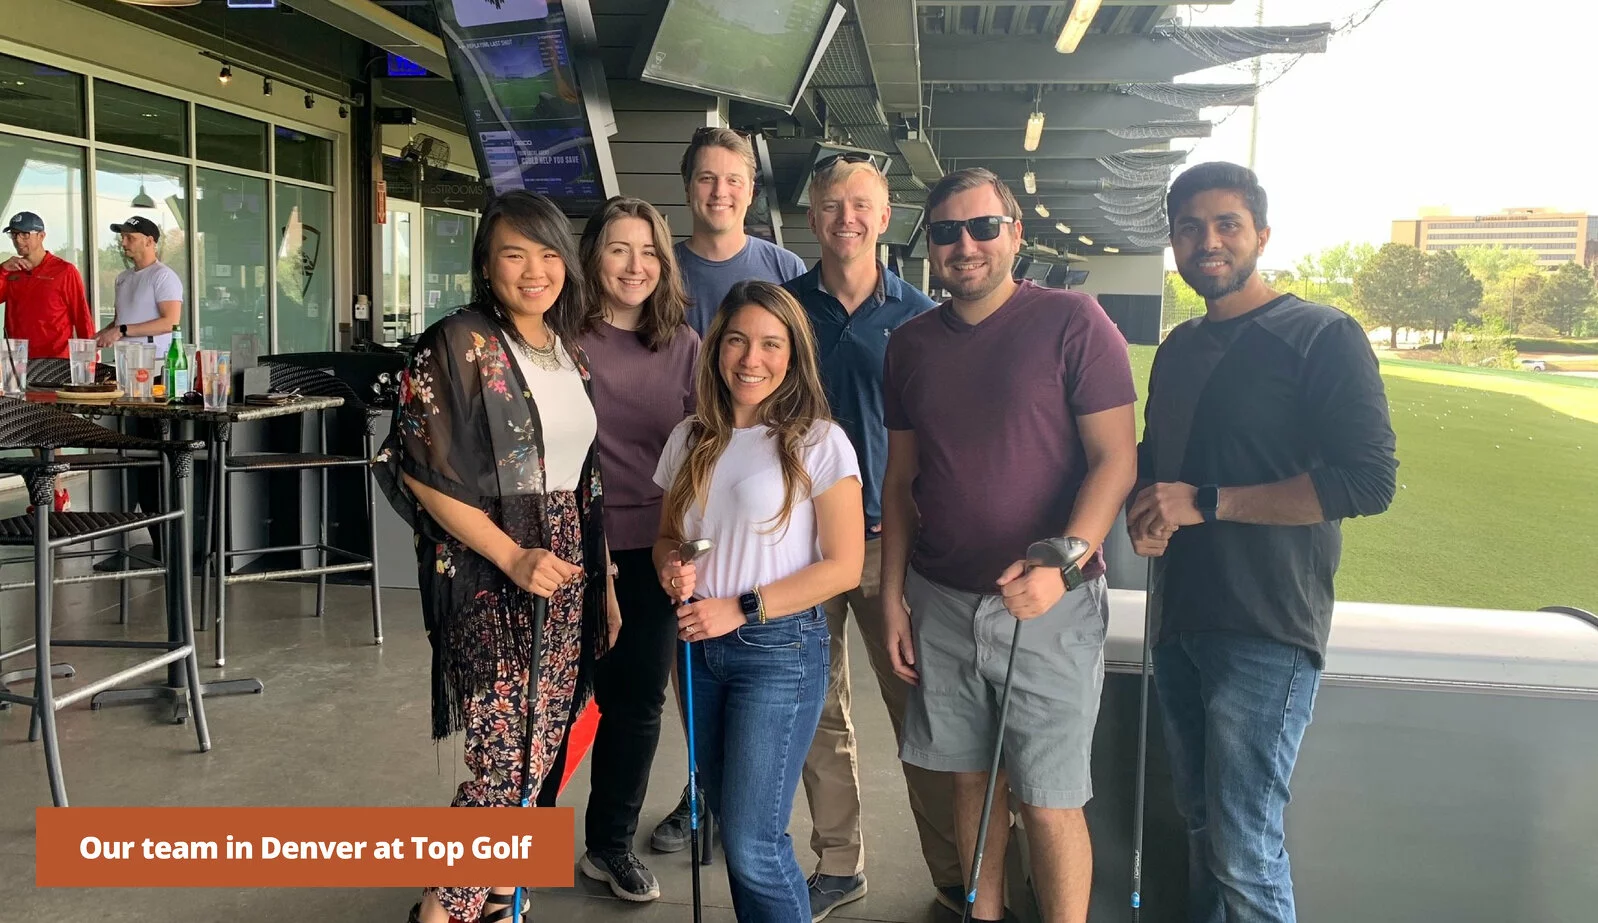  2022/06/About-Us-Team-Photography_CO-Top-Golf.jpg 